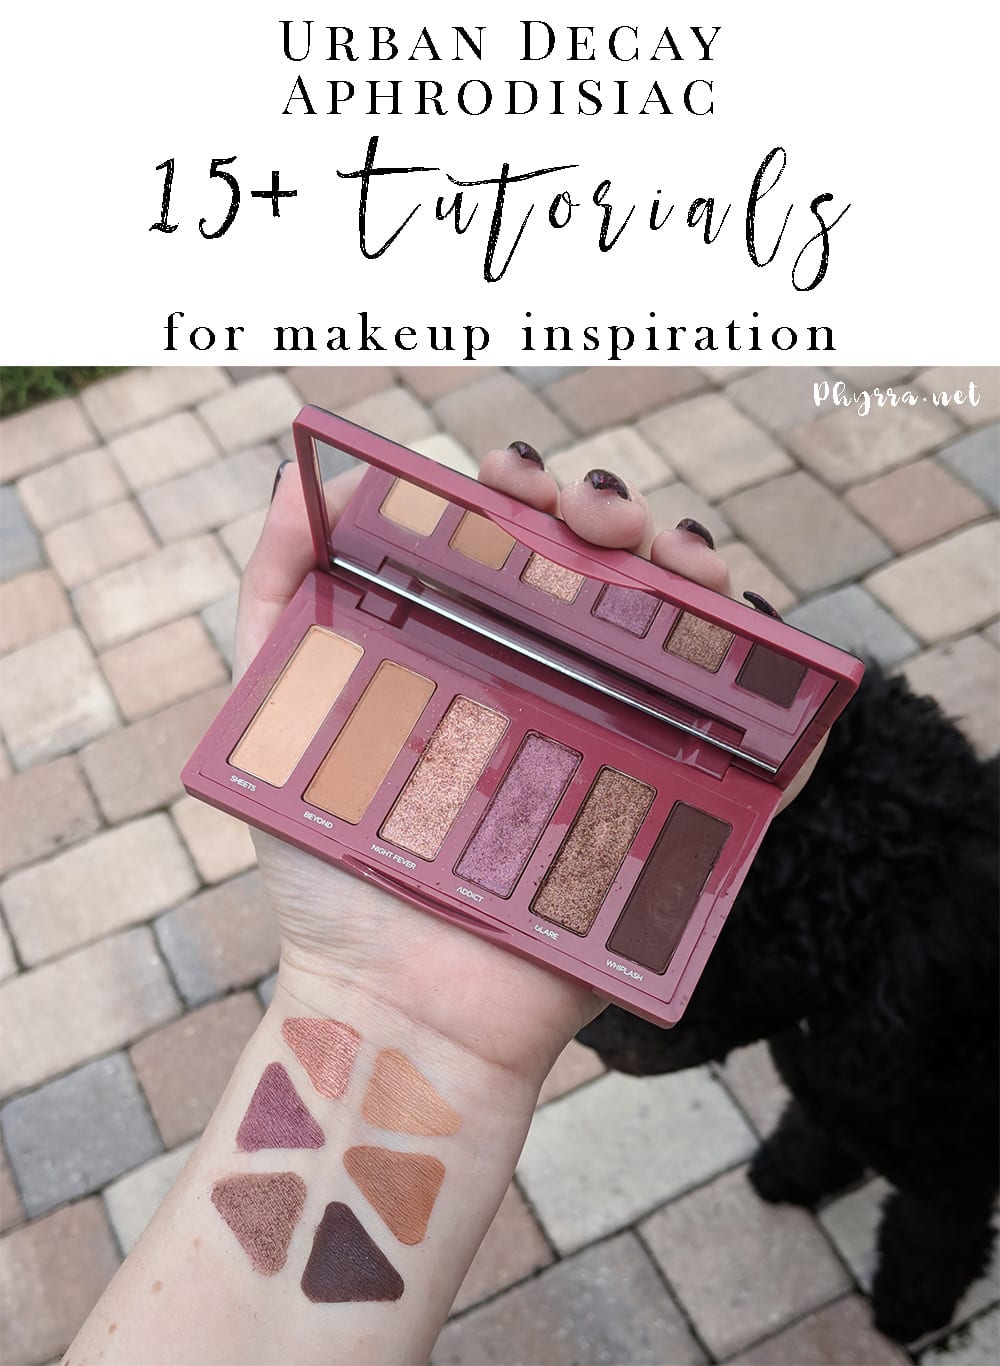 Urban Decay Aphrodisiac Palette Tutorials and Looks for Inspiration